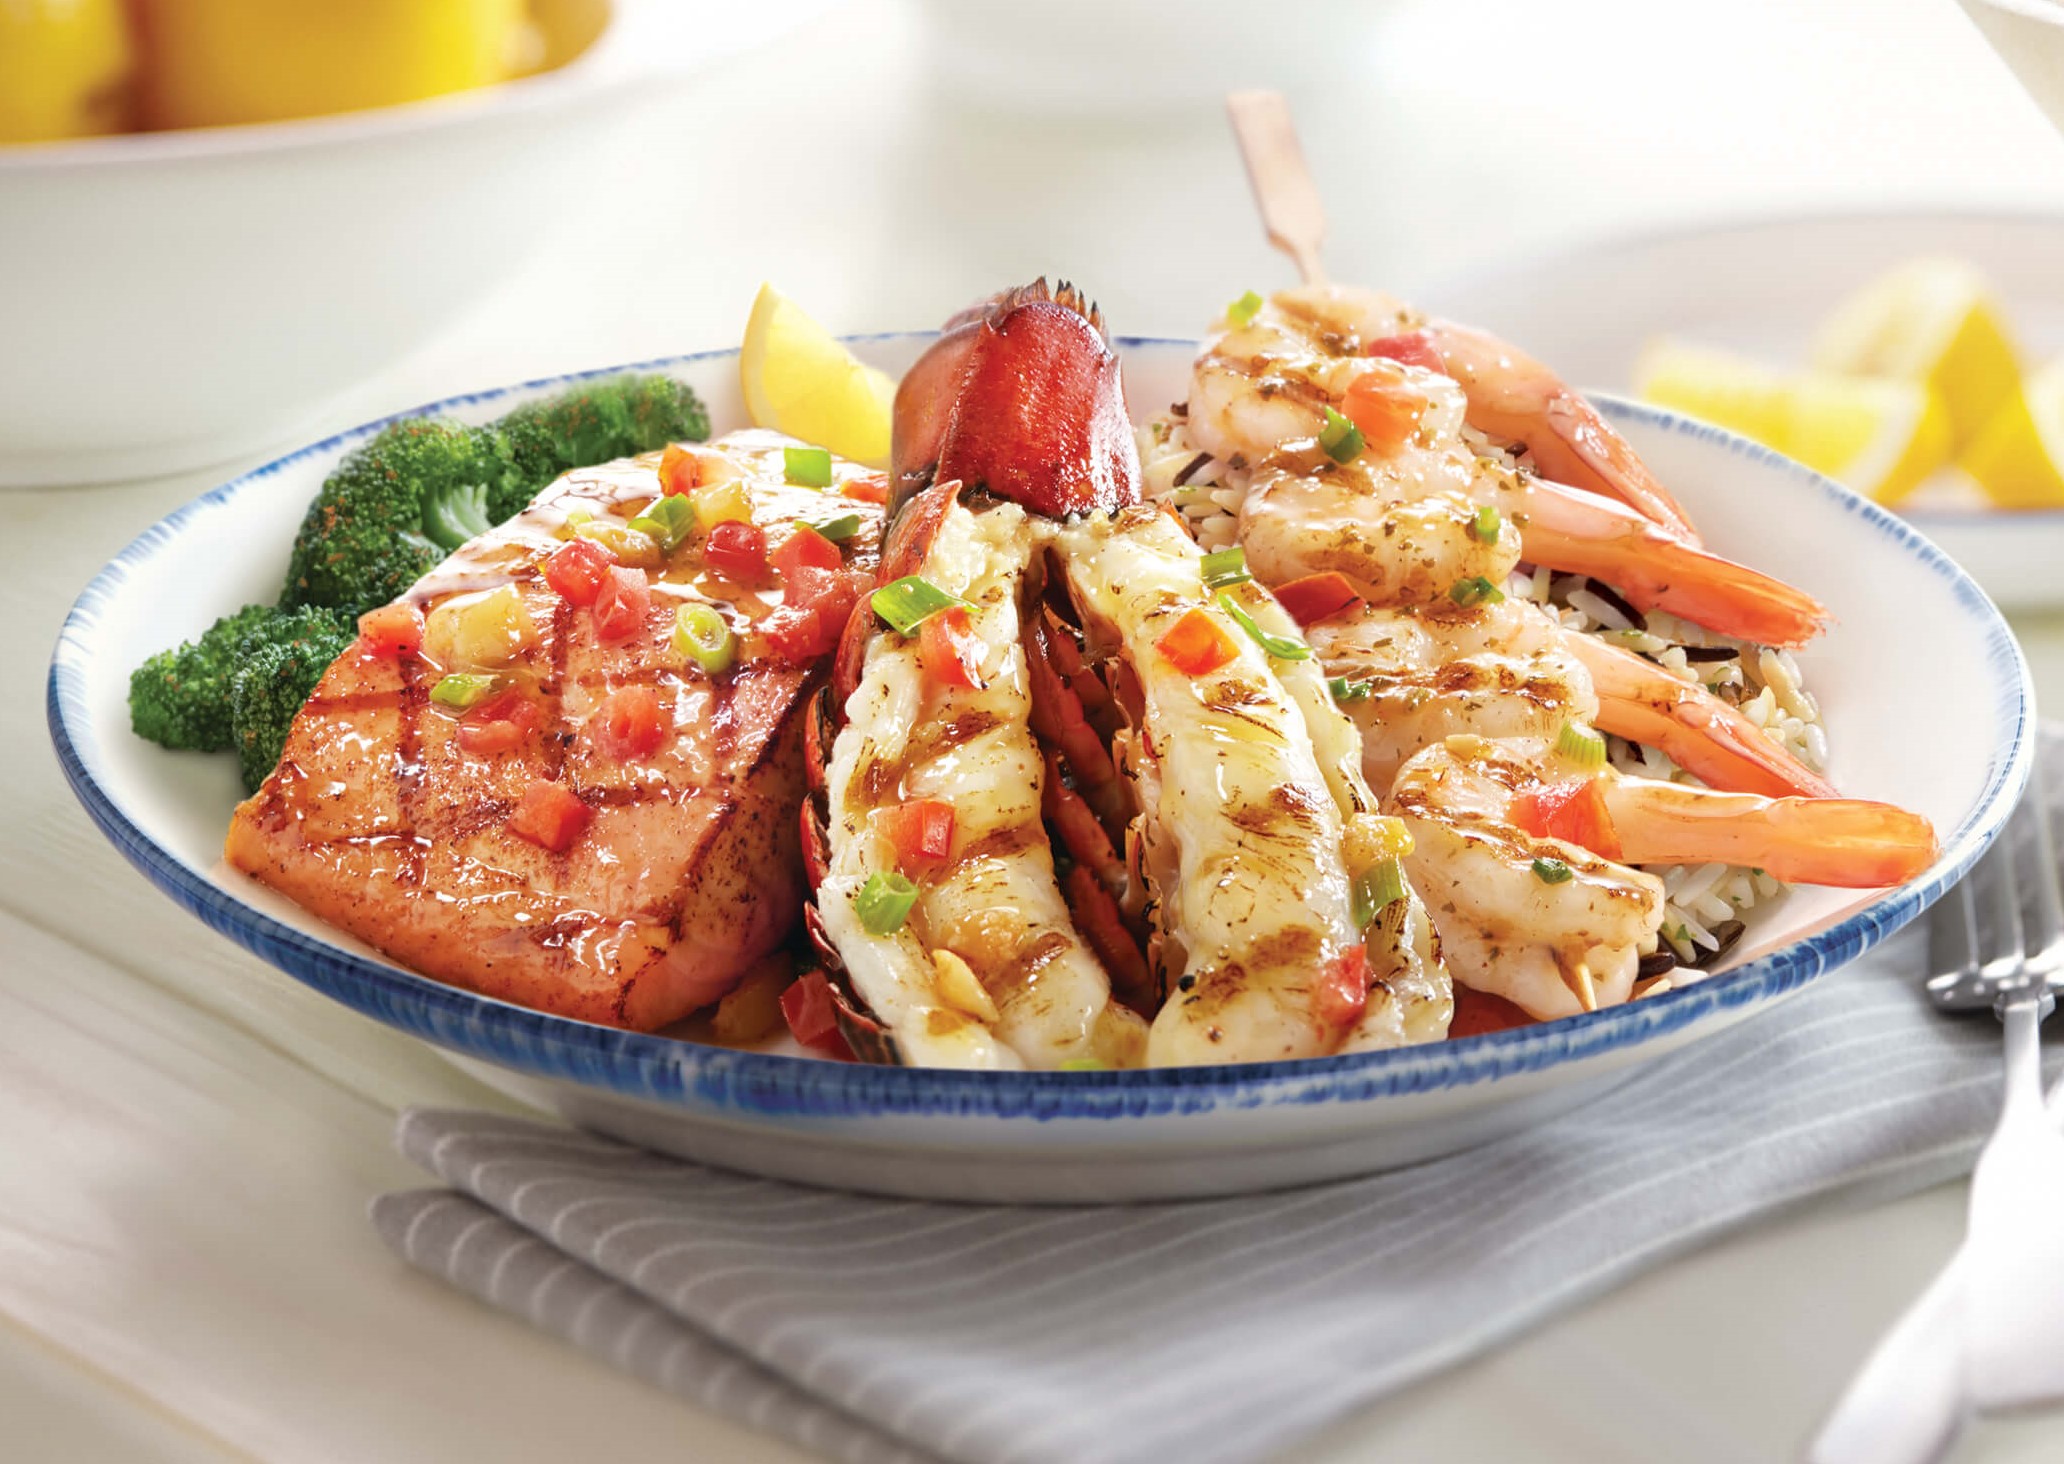 wood-grilled lobster, shrimp, and salmon at red lobster